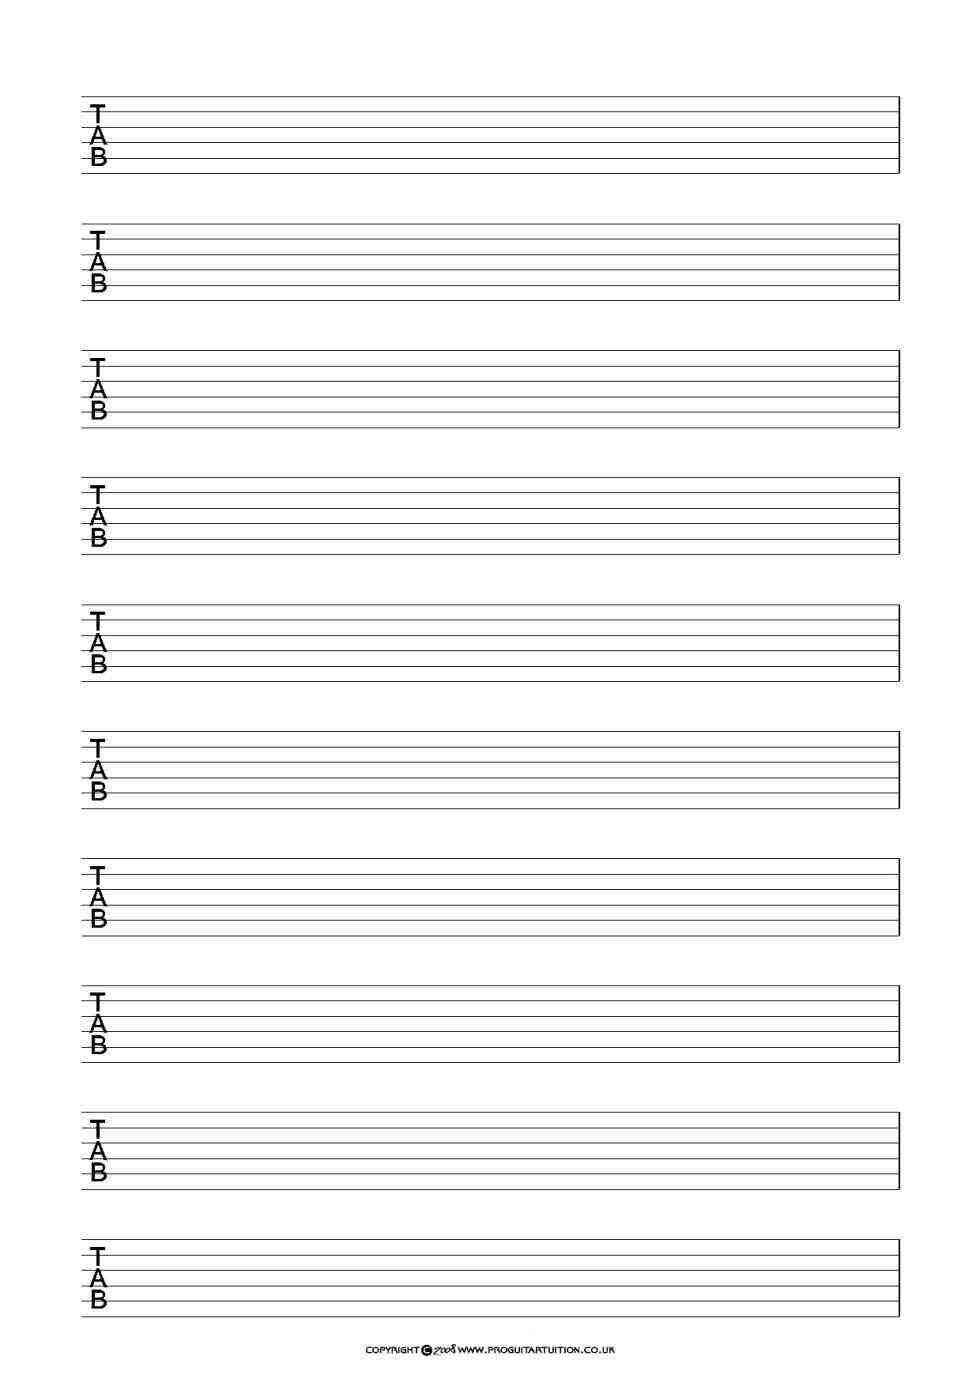 Sheet Music Template For Guitar Sample Pdf Cue Printable Word One Te intended for Blank Sheet Music Template For Word